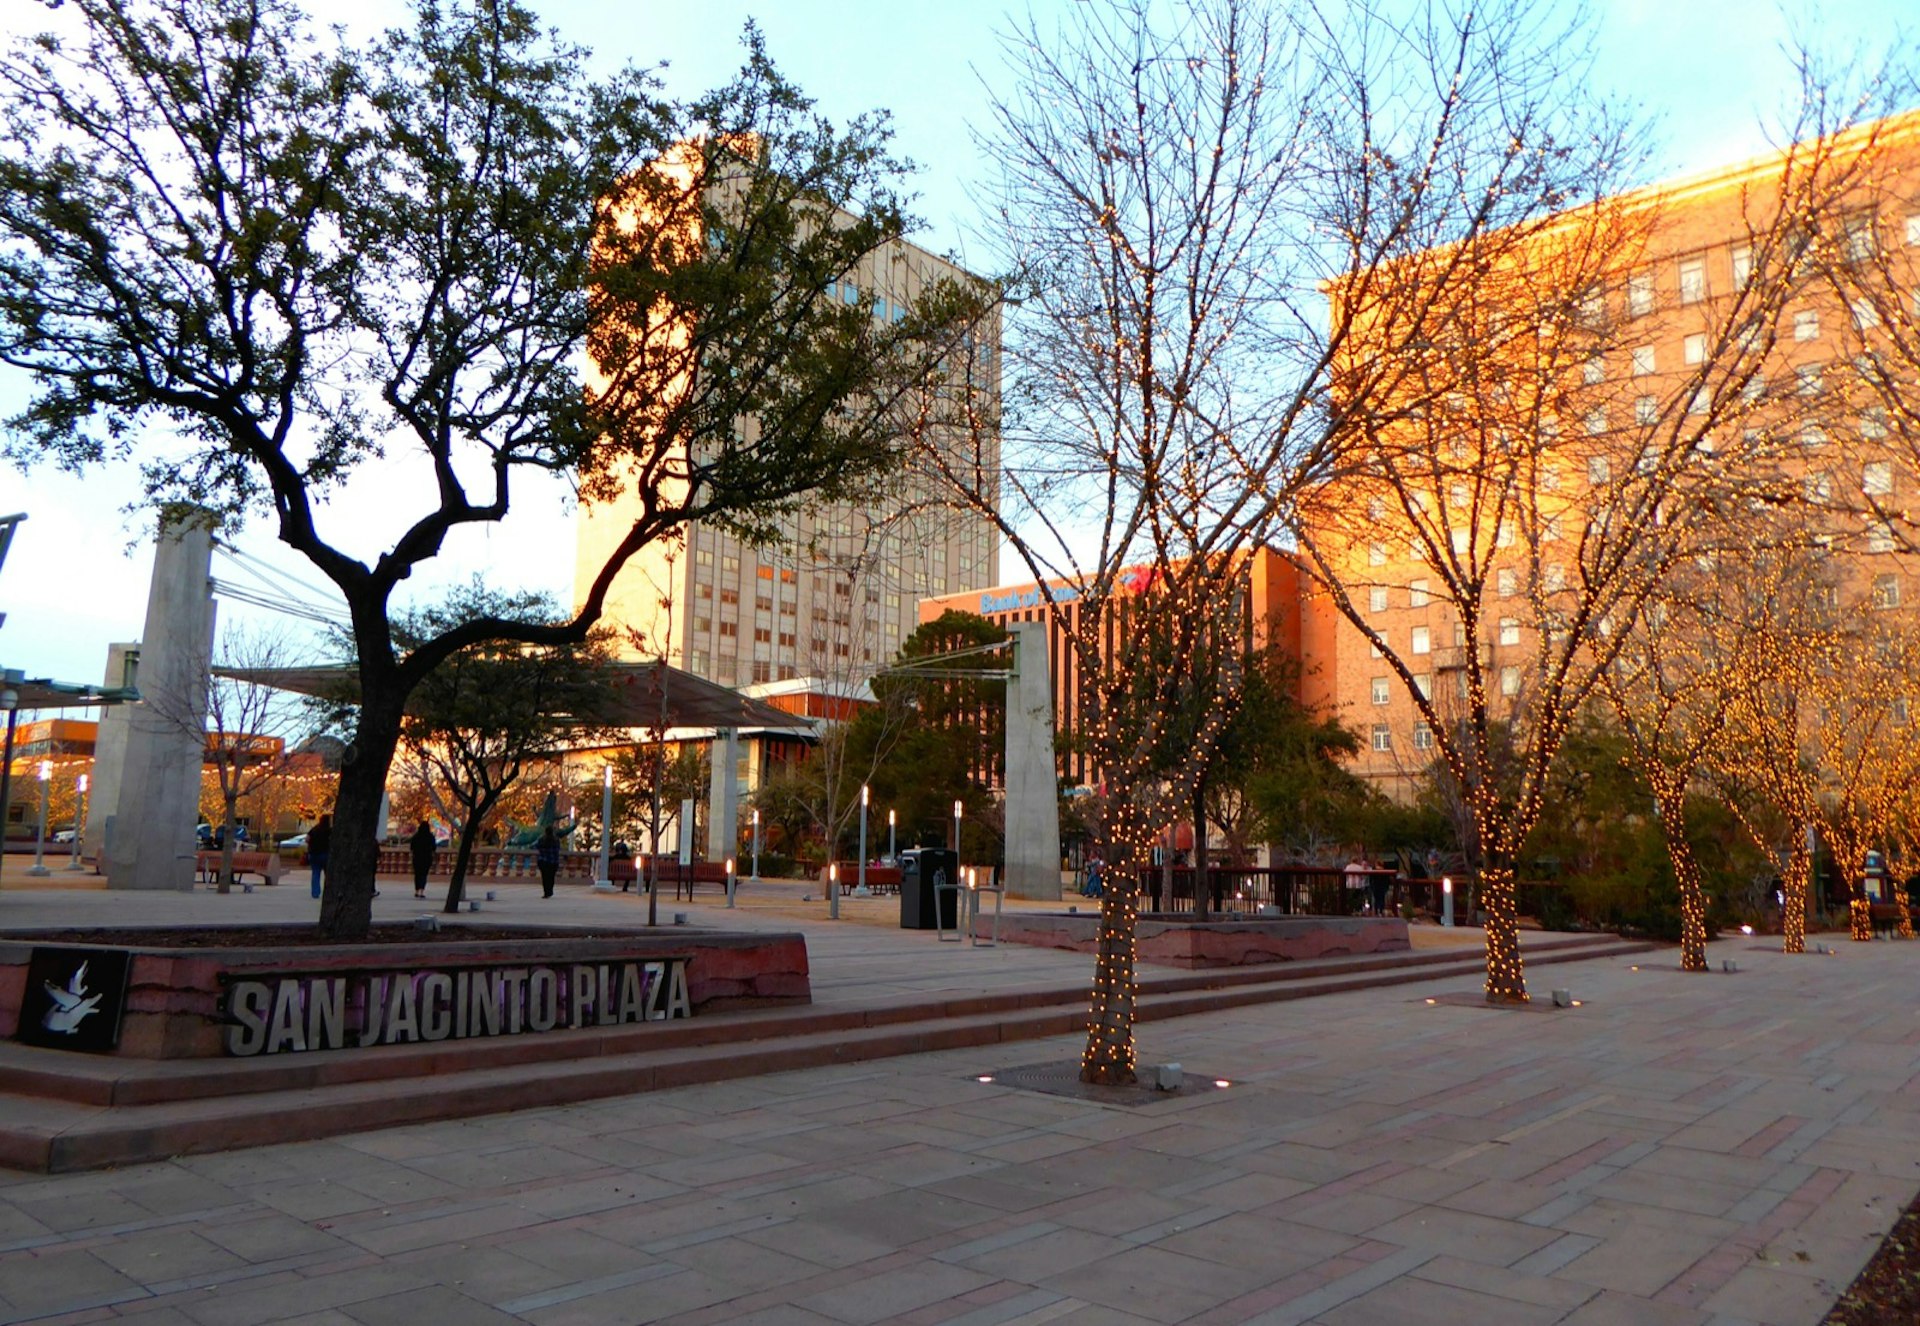 A stone-floored plaza is interspersed with trees and buildings in El Paso Texas